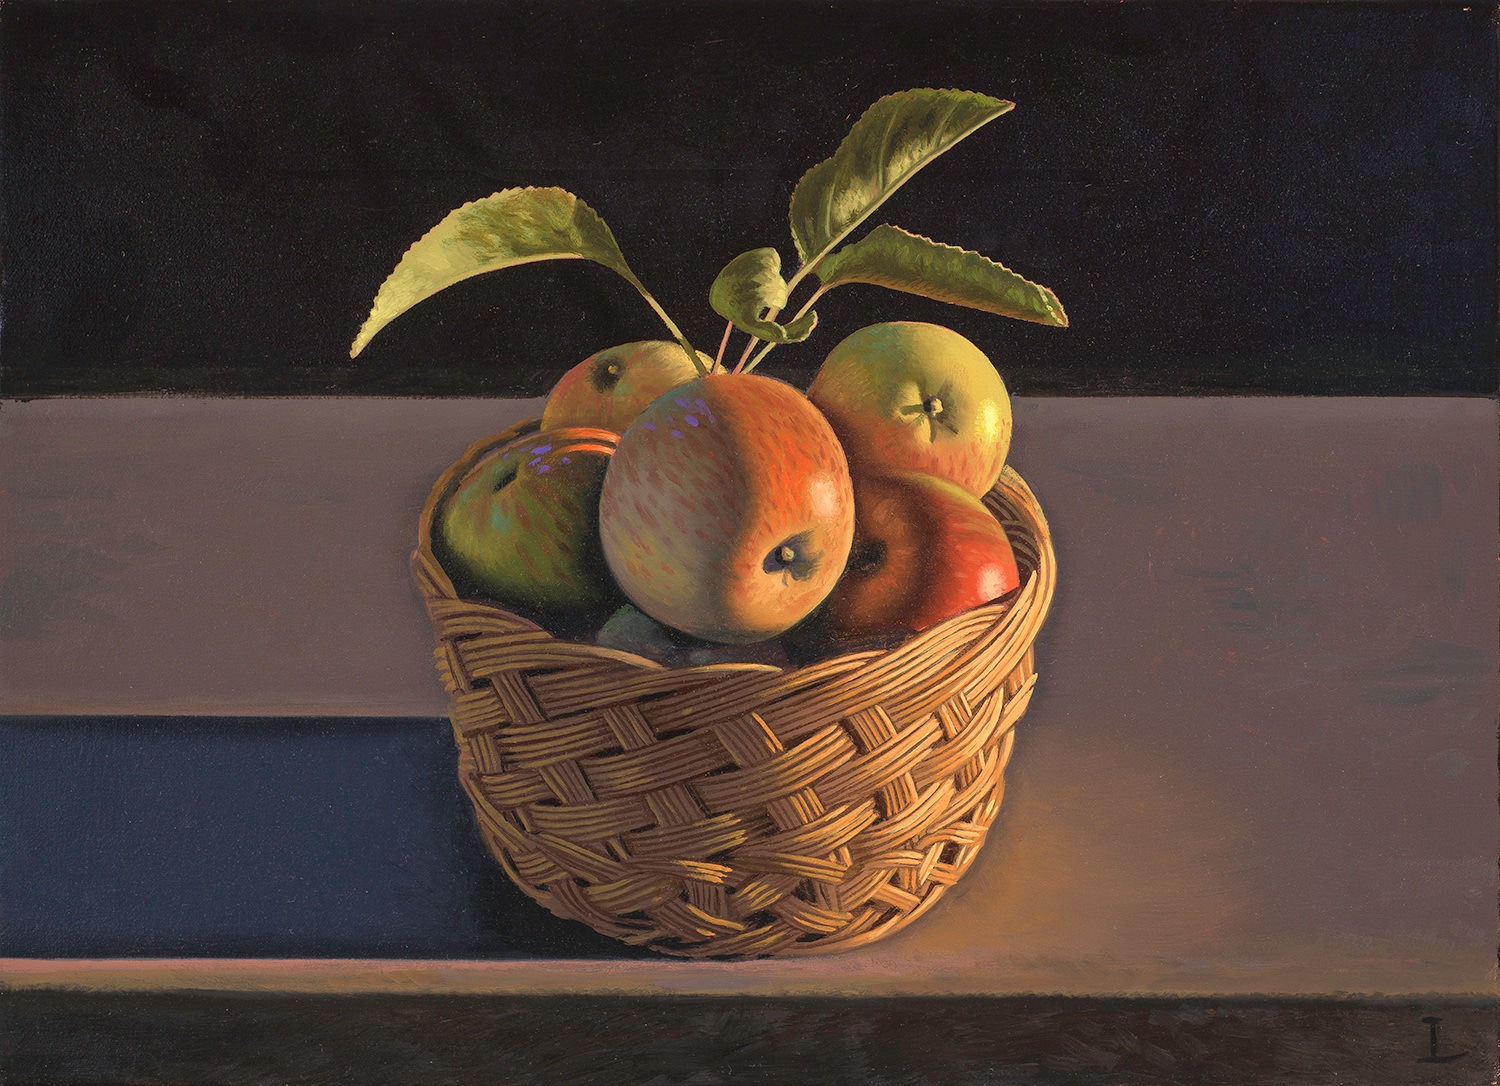 David Ligare (b. 1945), Still Life with Apples and Basket, 2014